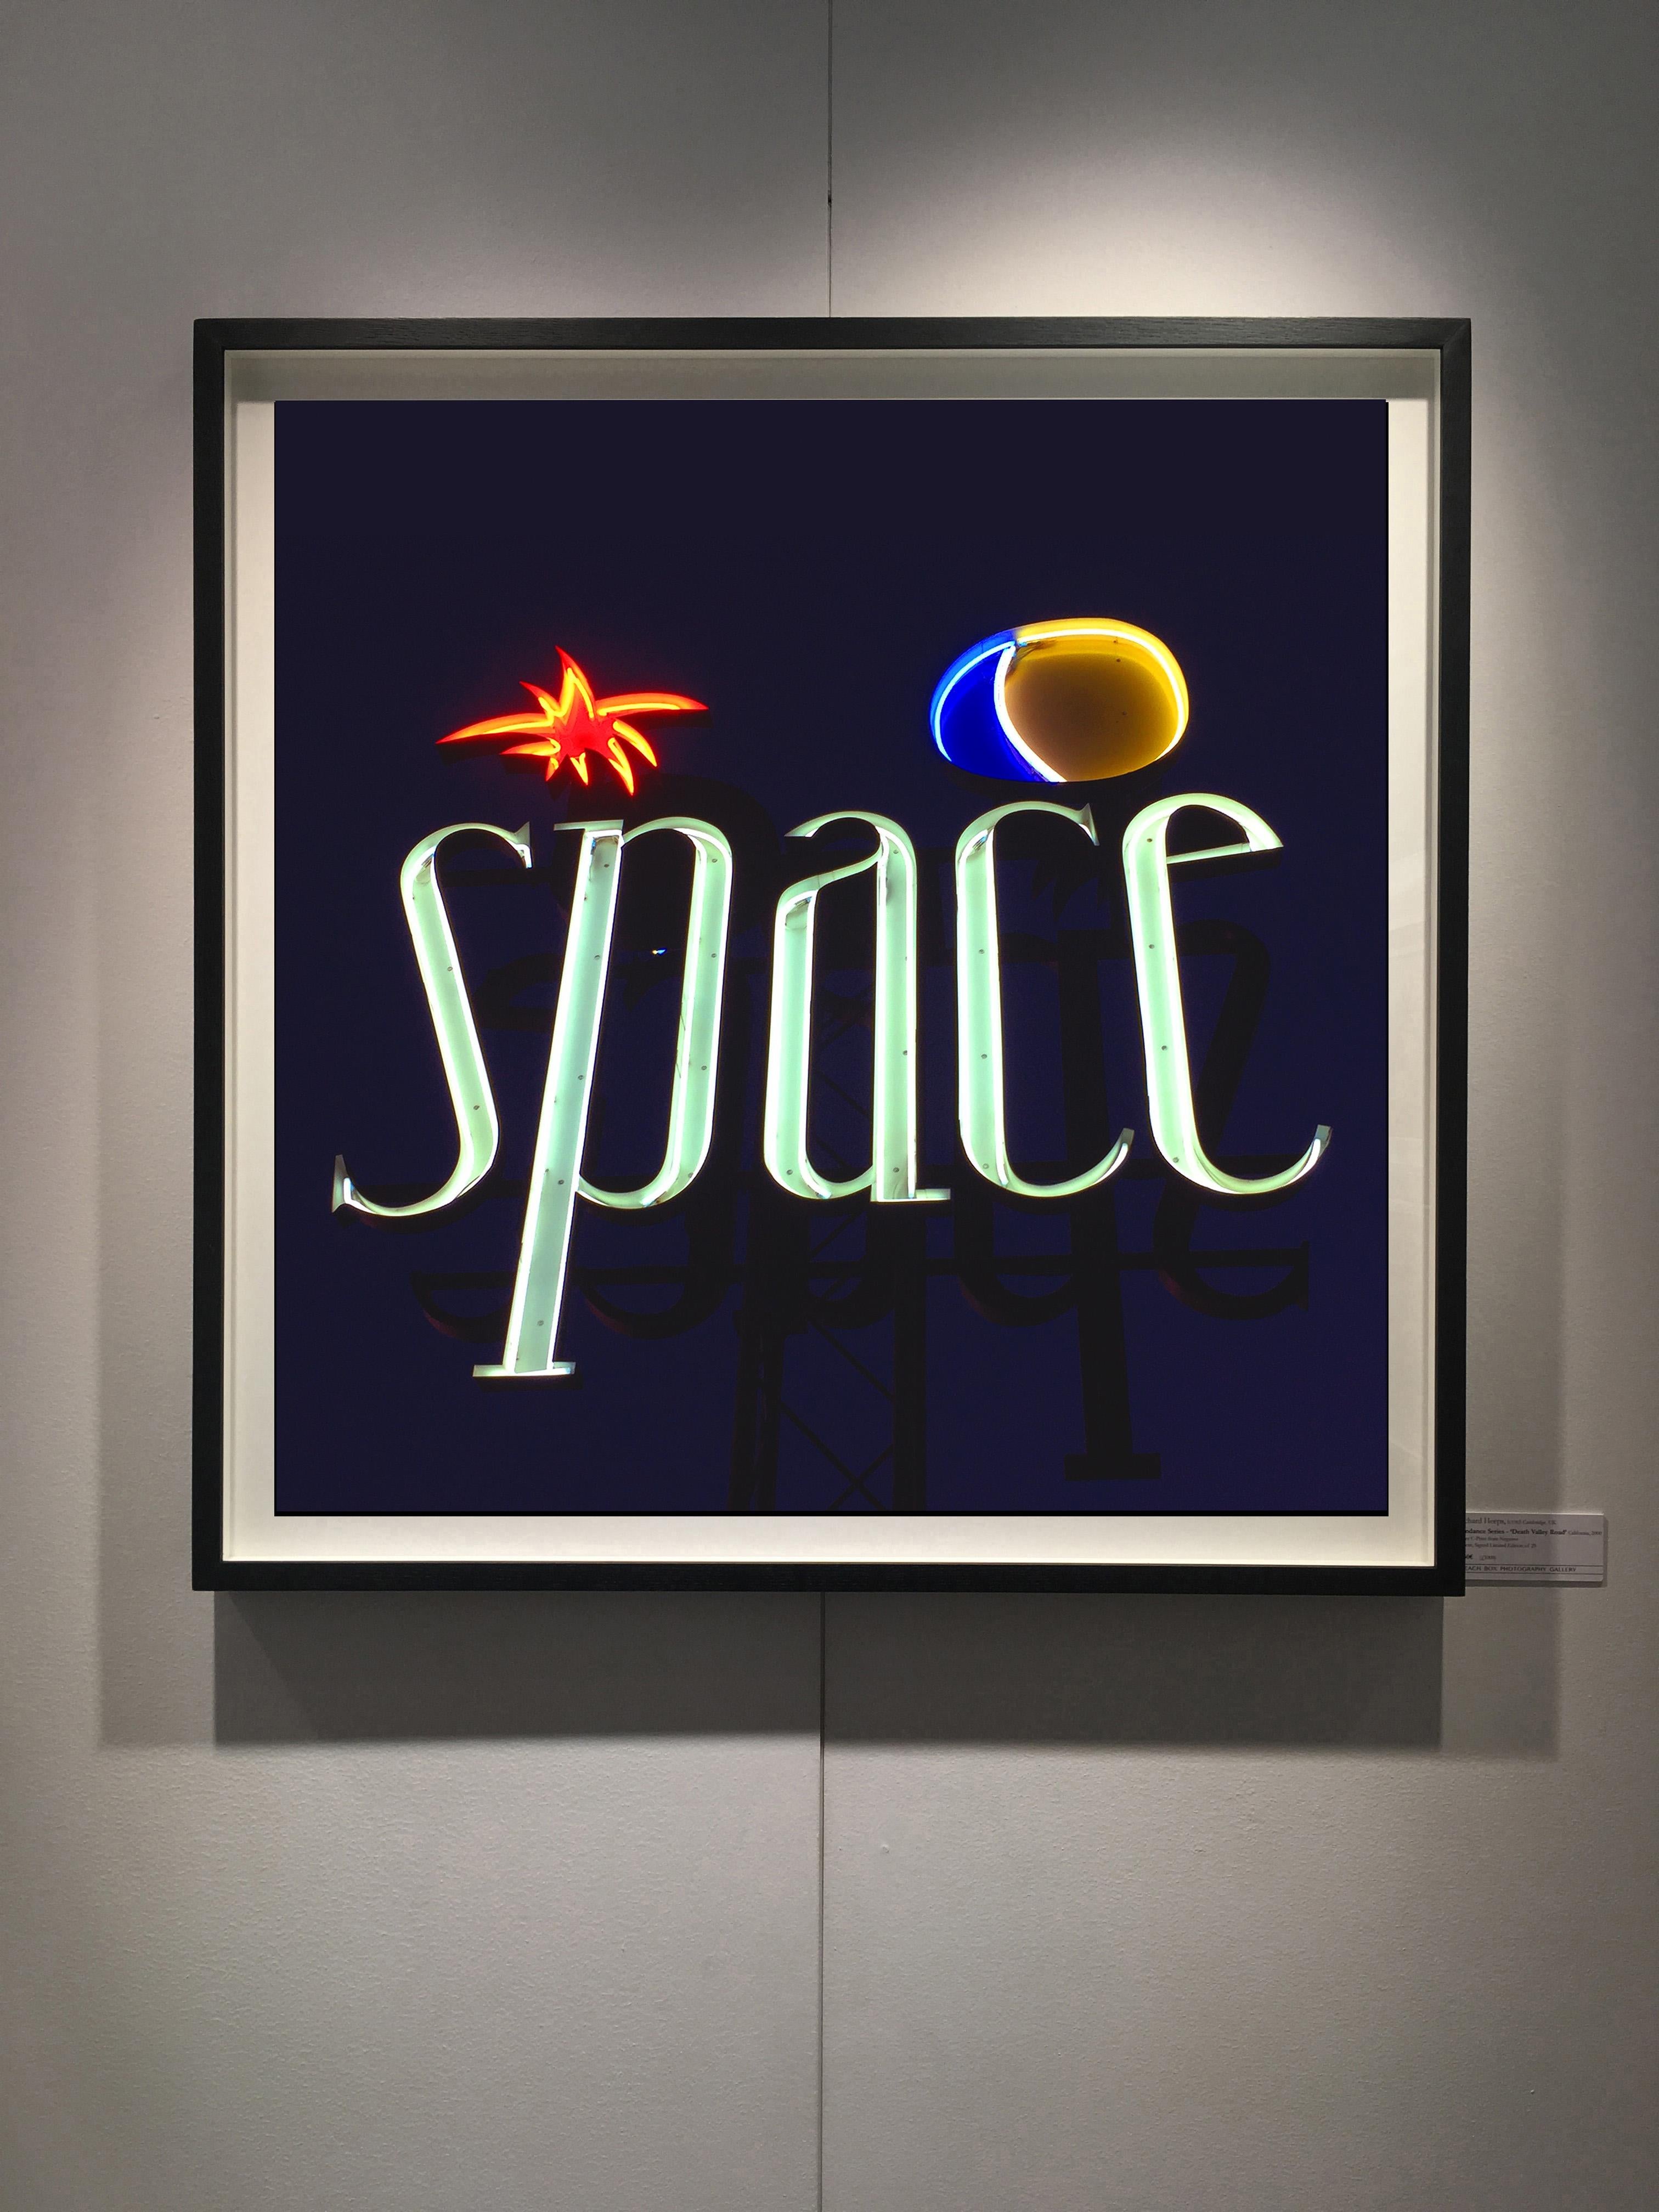 Space, Ibiza, the Balearic Islands Framed - Contemporary Colour Sign Photography - Black Color Photograph by Richard Heeps